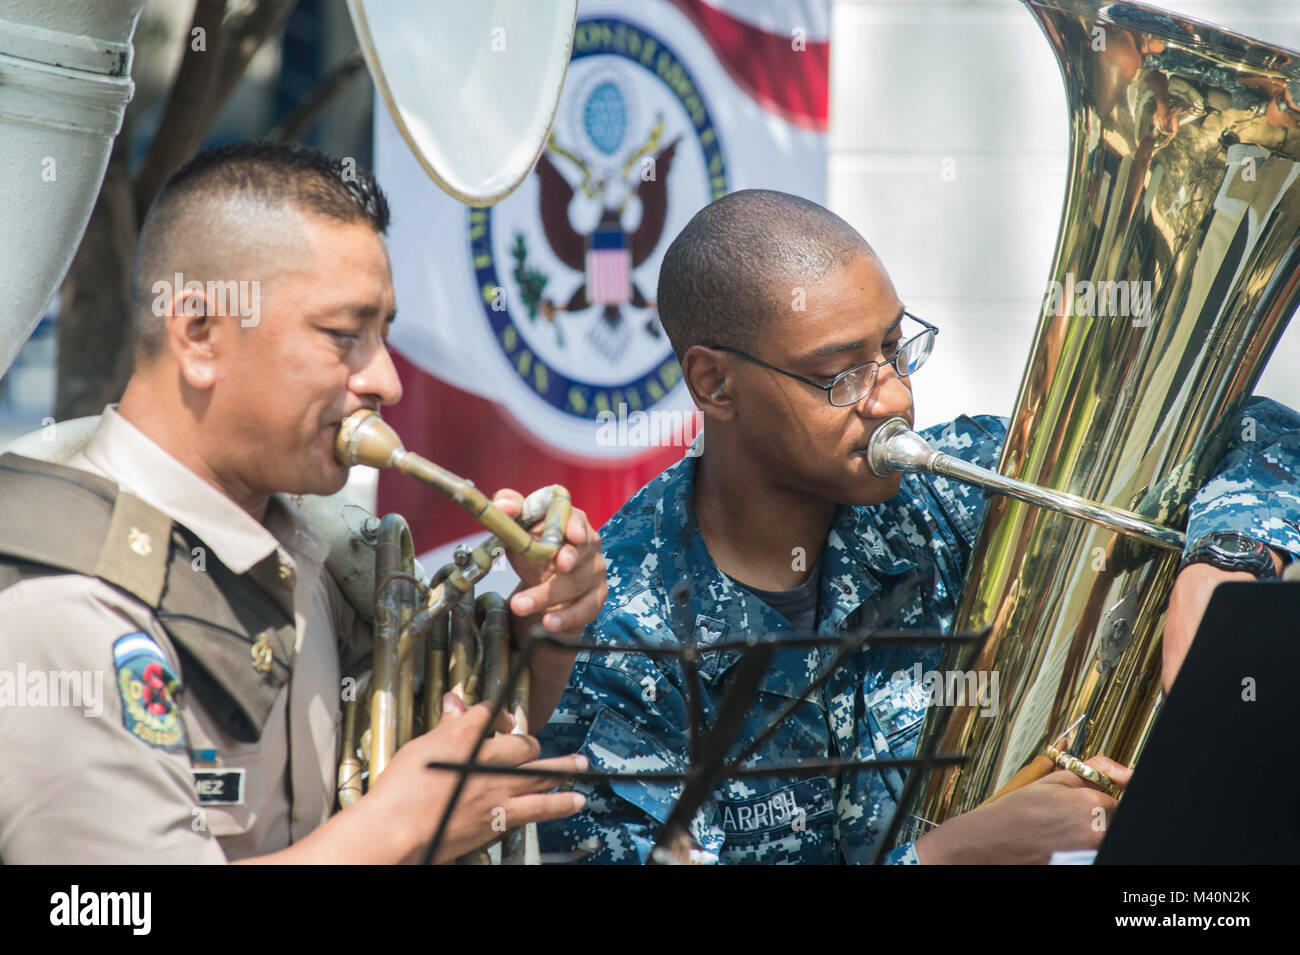 150617-N-PD309-067 SAN JULIAN, El Salvador (June 17, 2015) Musician 1st Class Brad Parrish, a native of Bowling Green, Ky., assigned to the U.S. Fleet Forces Band Uncharted Waters plays alongside a member of the Salvadoran military band, Destacamento Militar 6, at a medical site established at Centro Escolar Doctor Eduardo Enrique Barrientos during Continuing Promise 2015. Continuing Promise is a U.S. Southern Command-sponsored and U.S. Naval Forces Southern Command/U.S. 4th Fleet-conducted deployment to conduct civil-military operations including humanitarian-civil assistance, subject matter  Stock Photo